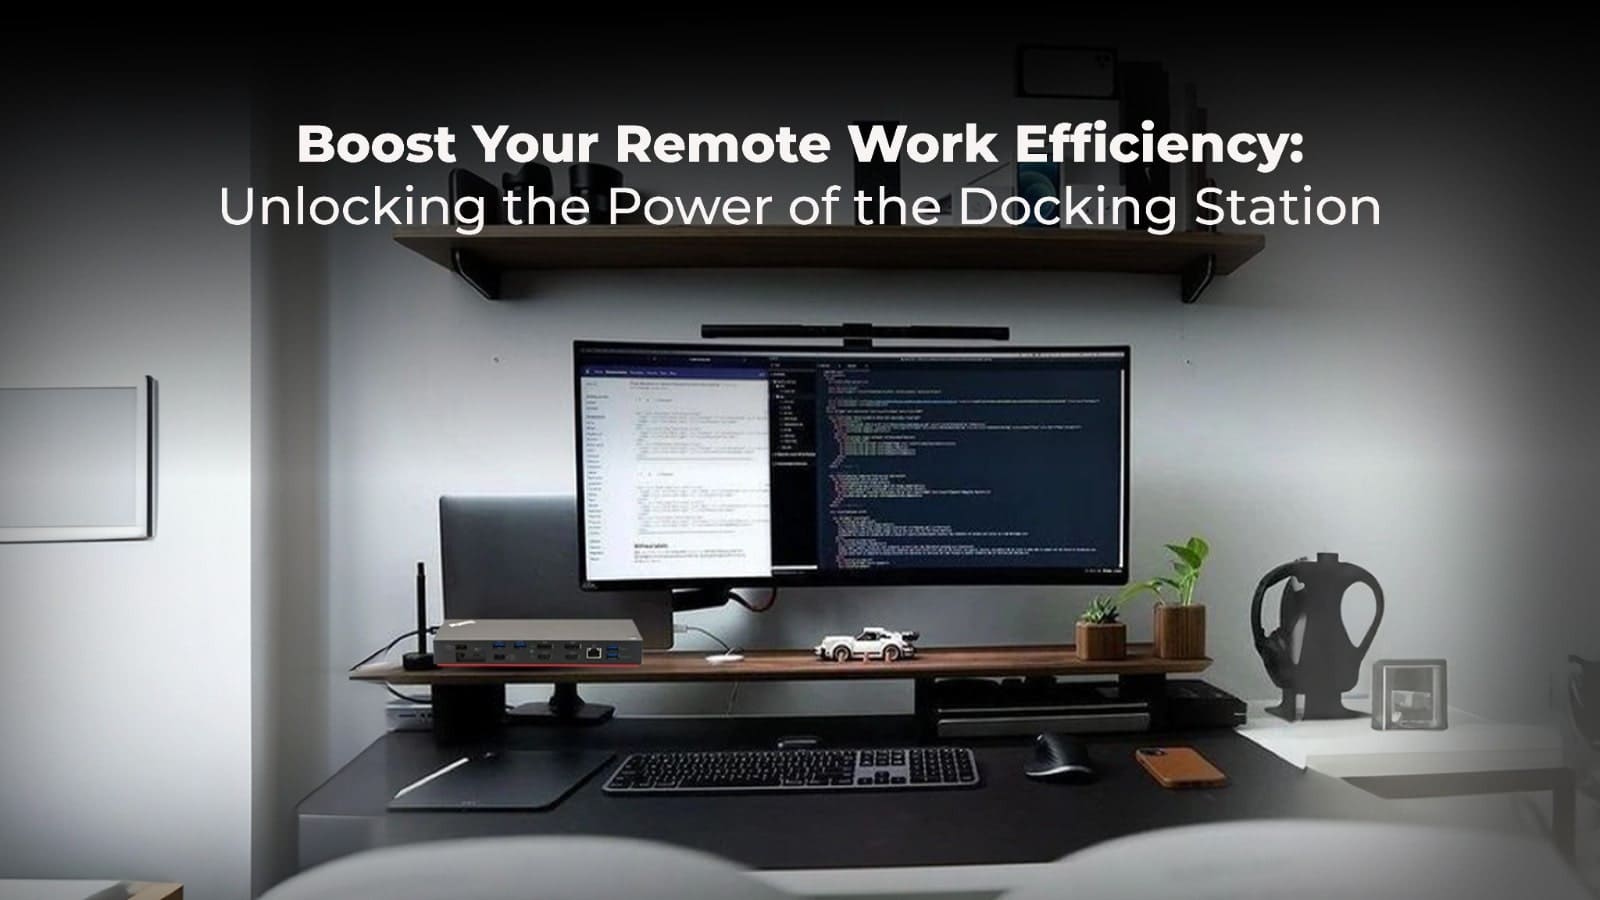 Boost Remote Efficiency: Docking Station Power Unleashed" - Alt text: A modern docking station amidst tech gear, symbolizing enhanced productivity for remote work